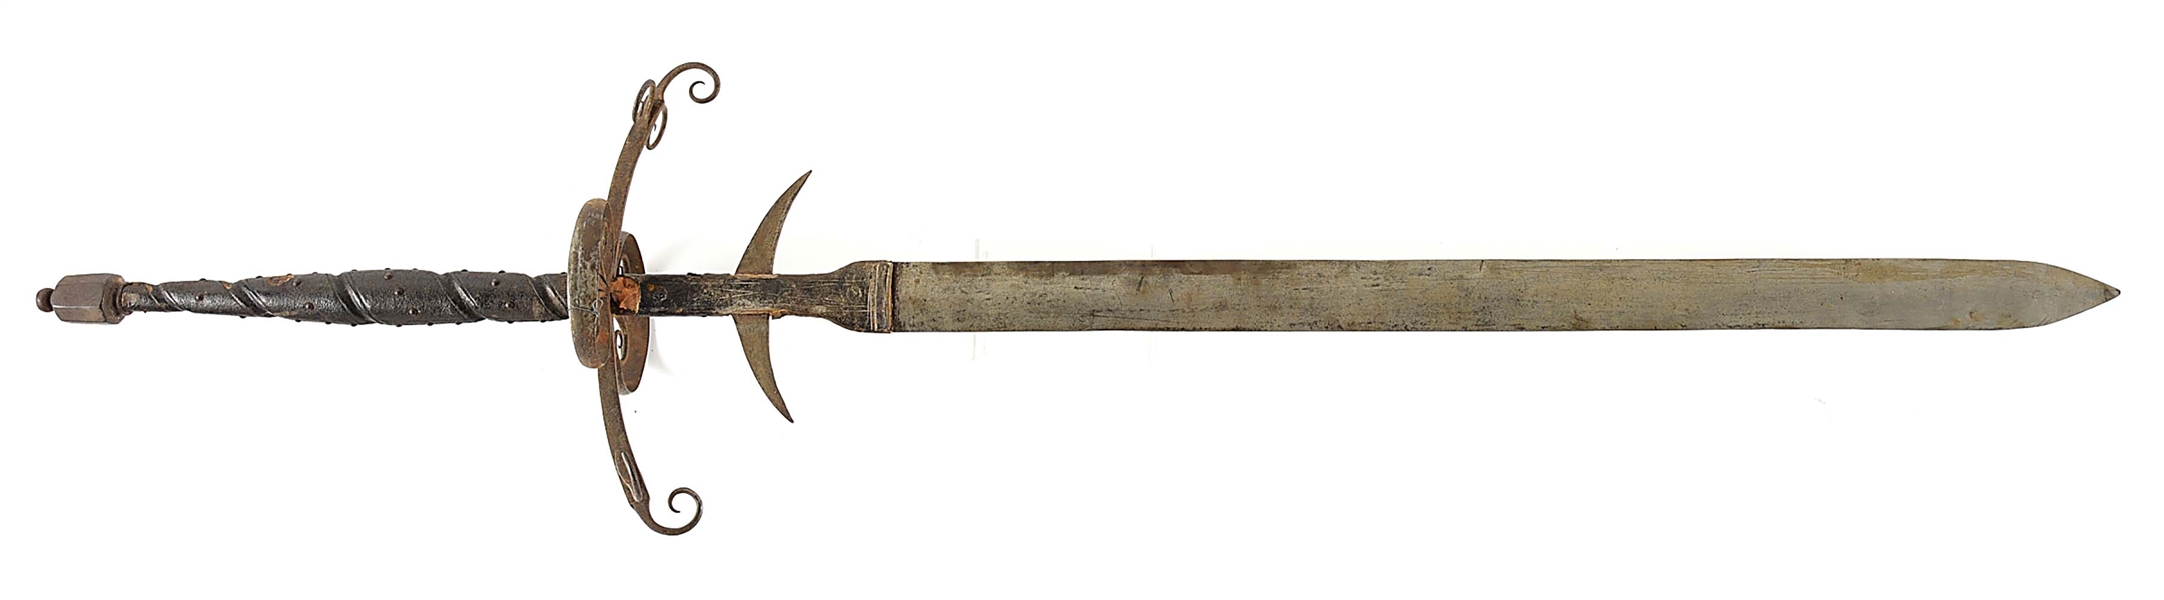 A BEARING SWORD, FOR USE IN PROCESSIONS AND PARADES.